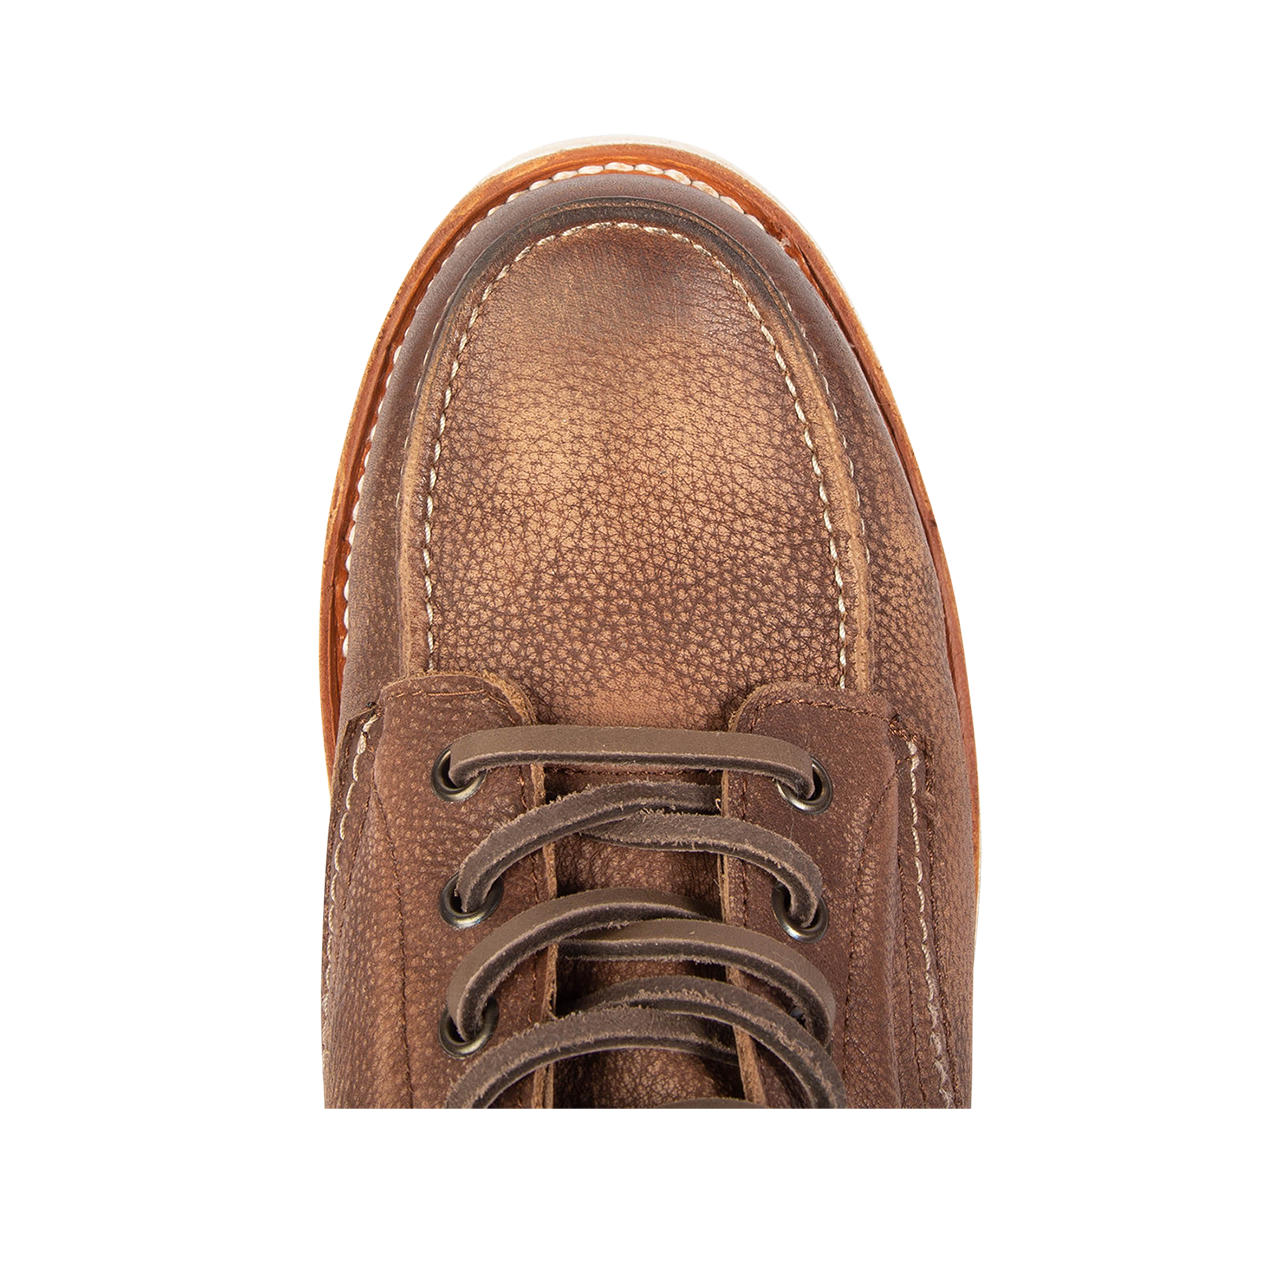 Top view showing round toe and leather lacing on FREEBIRD men's Carbon brown distressed shoe